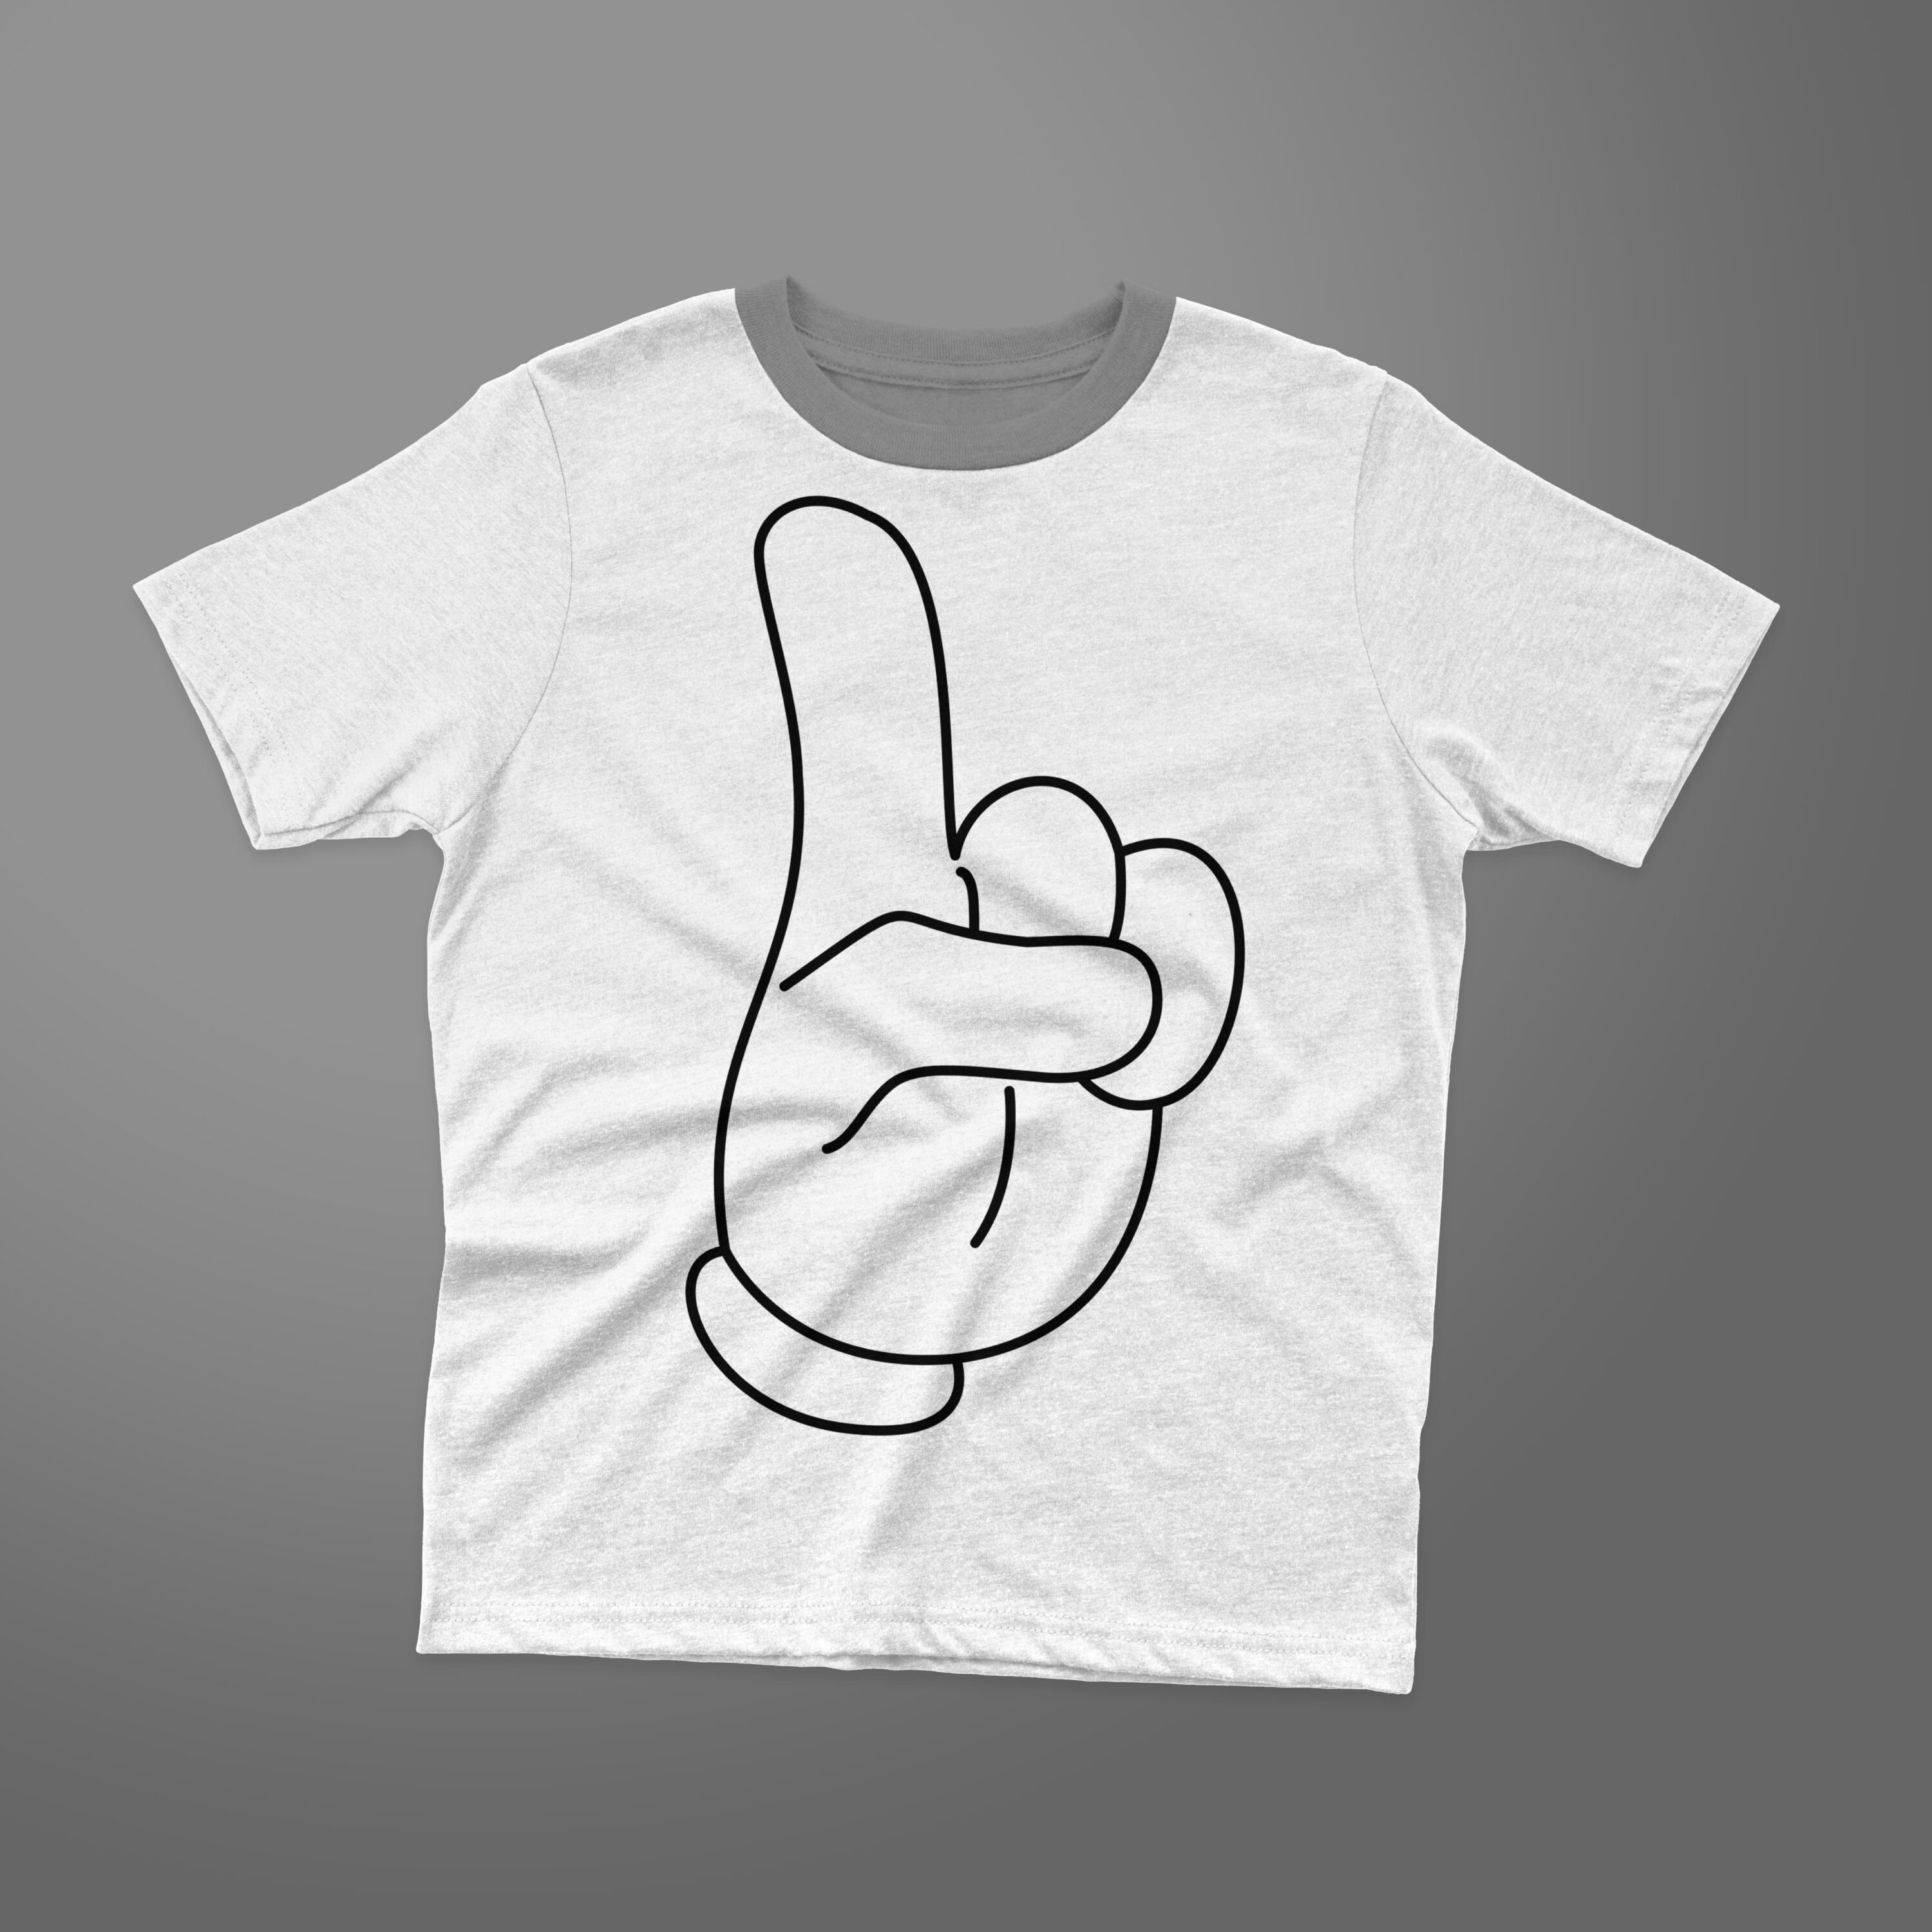 Mickey Mouse's finger up on a simple t-shirt.